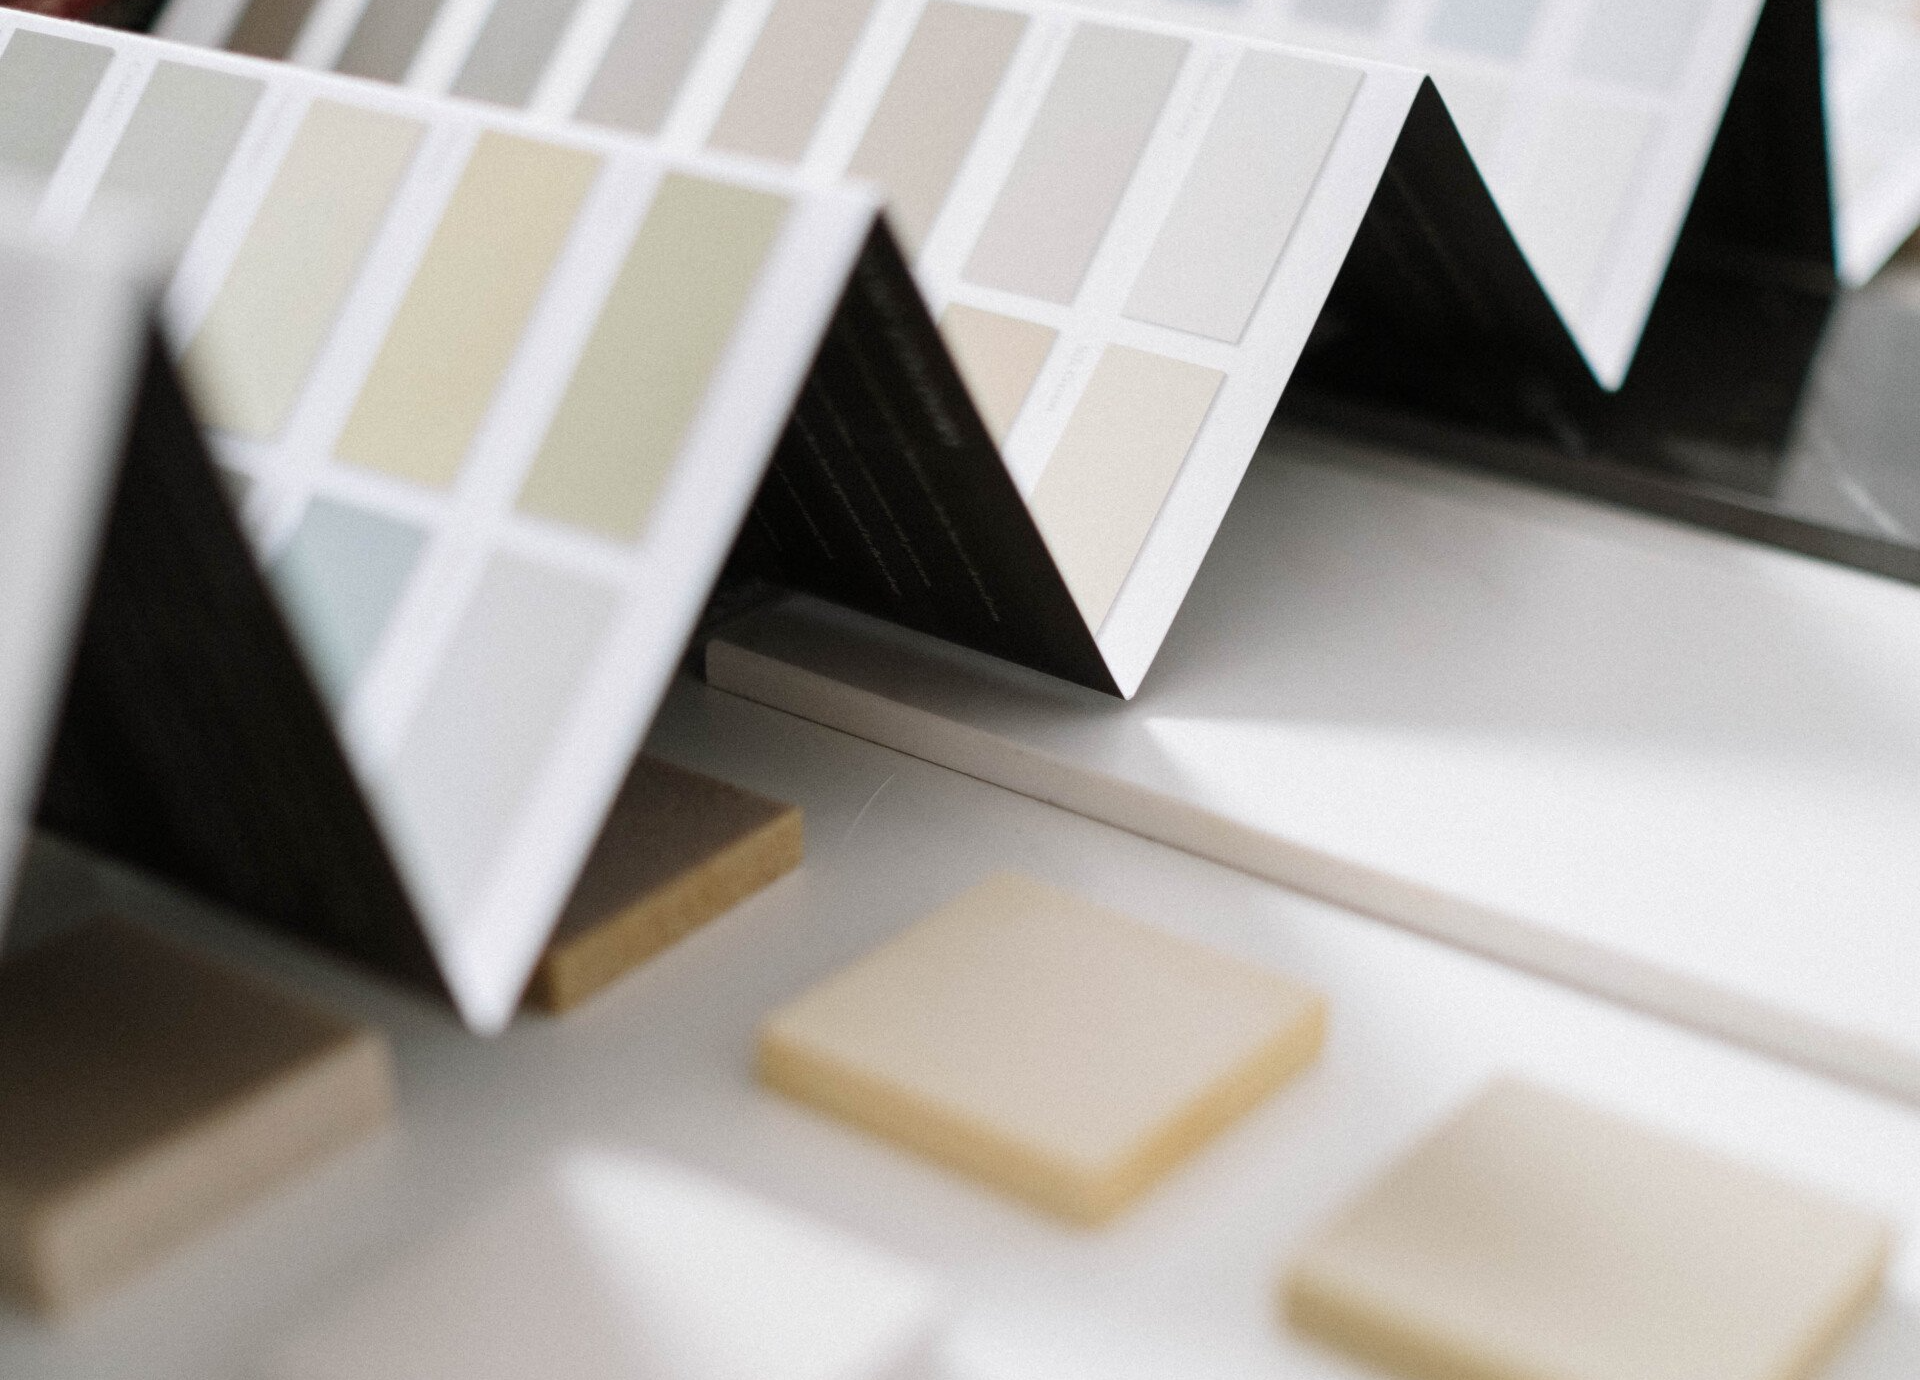 A collection of paint swatches for interior paint